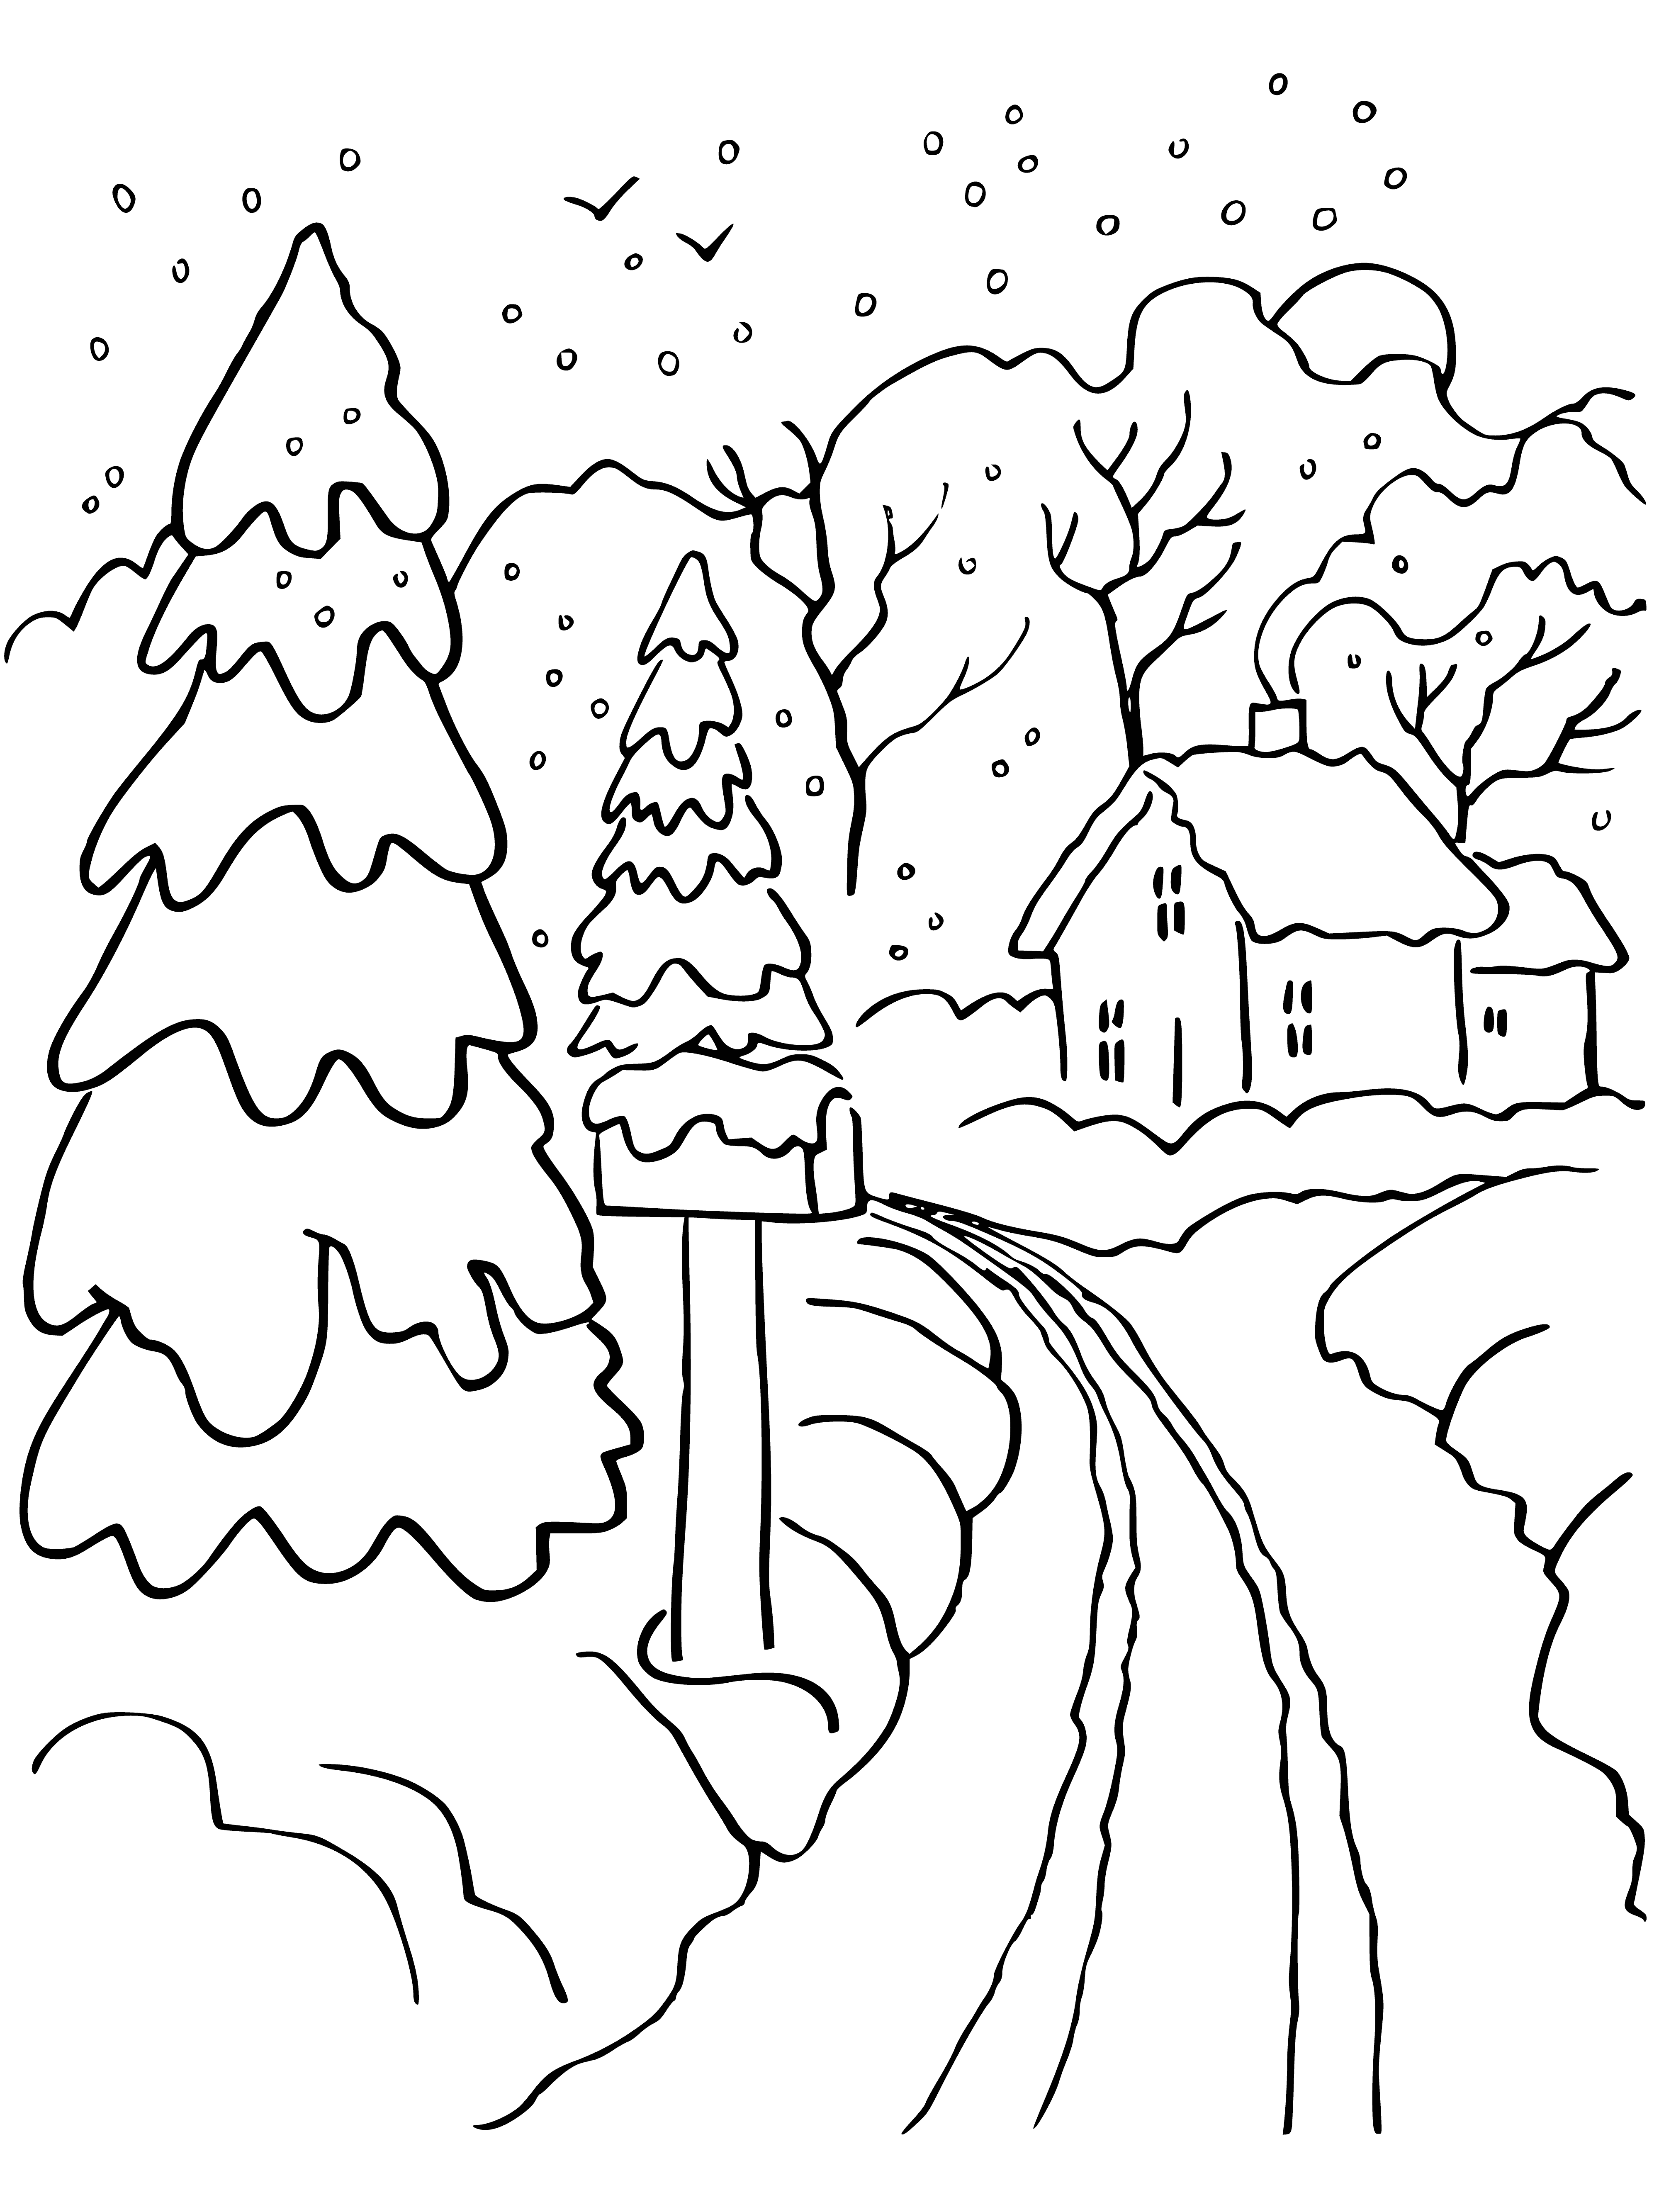 coloring page: Snow-capped mts & evergreen forest, blanketed in snow with a river winding through. A wintry, peaceful landscape. #nature